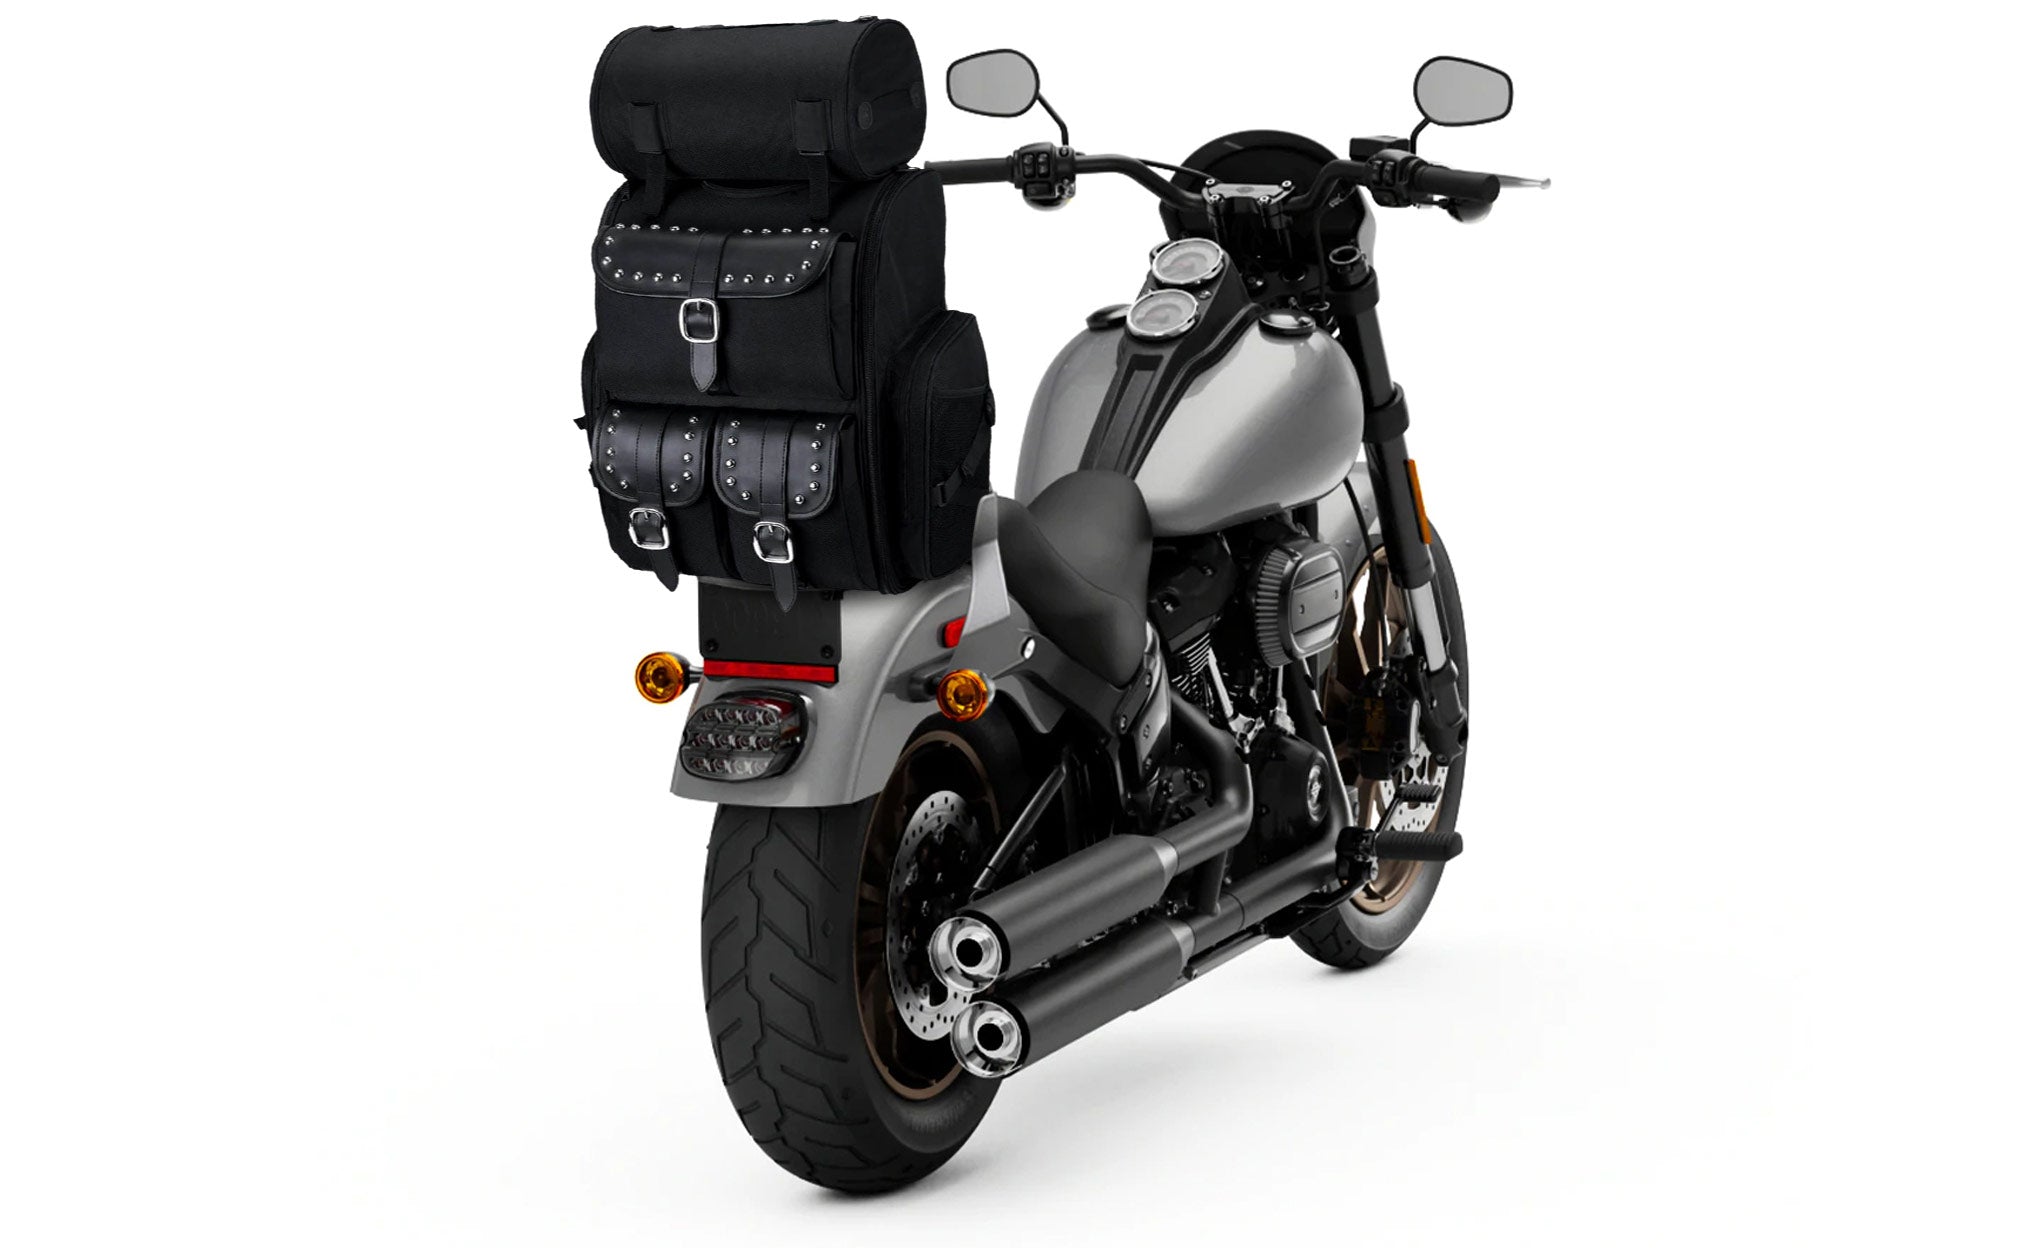 Viking Highway Extra Large Studded Hyosung Motorcycle Tail Bag Bag on Bike View @expand